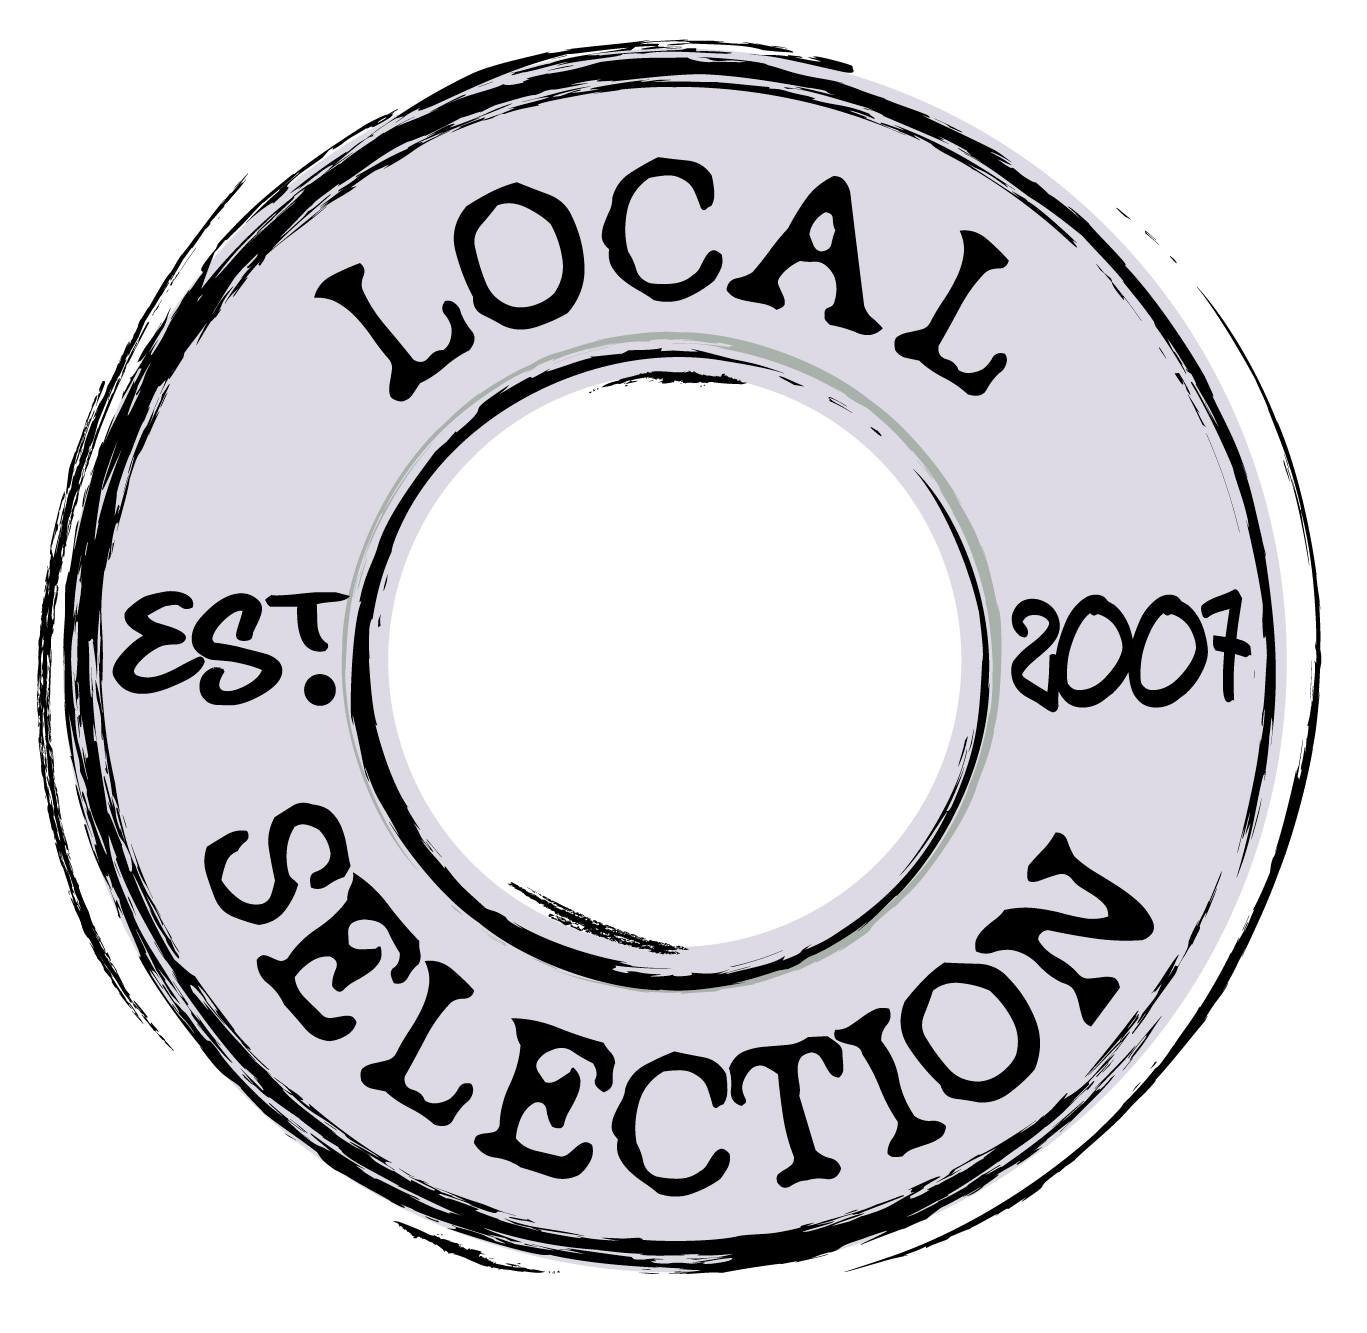 Local Selection